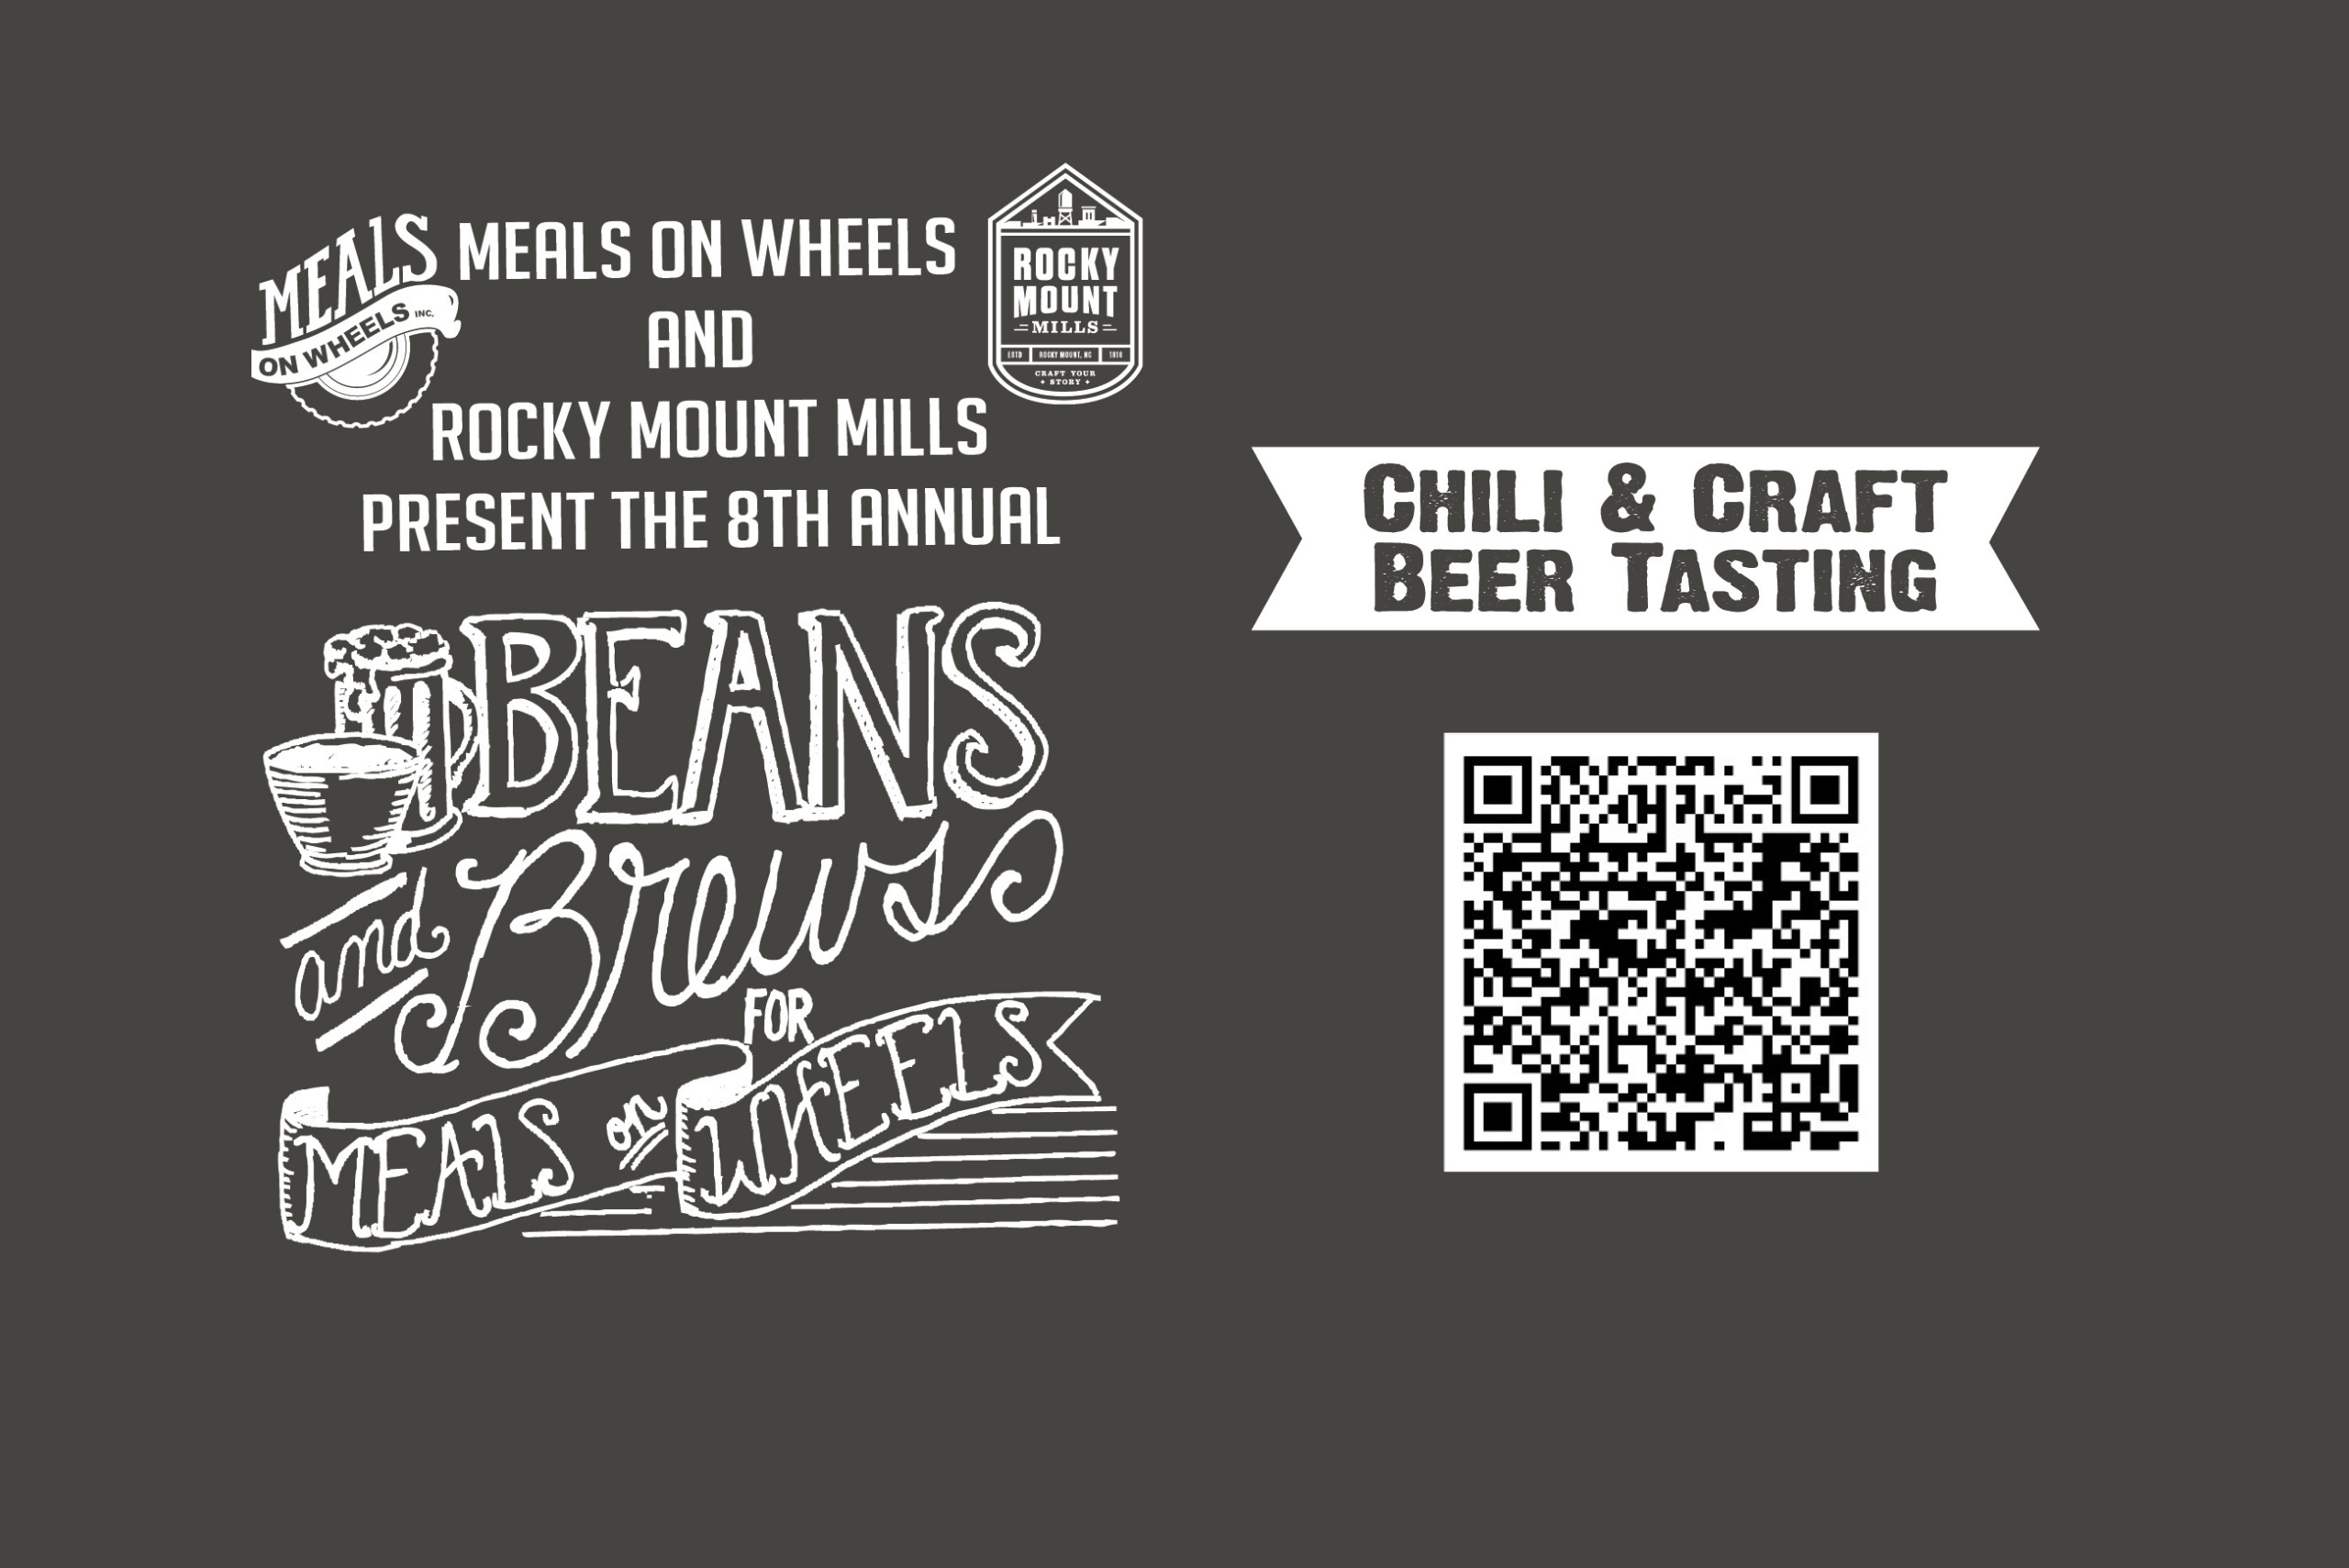 Beans and Brews for Meals on Wheels